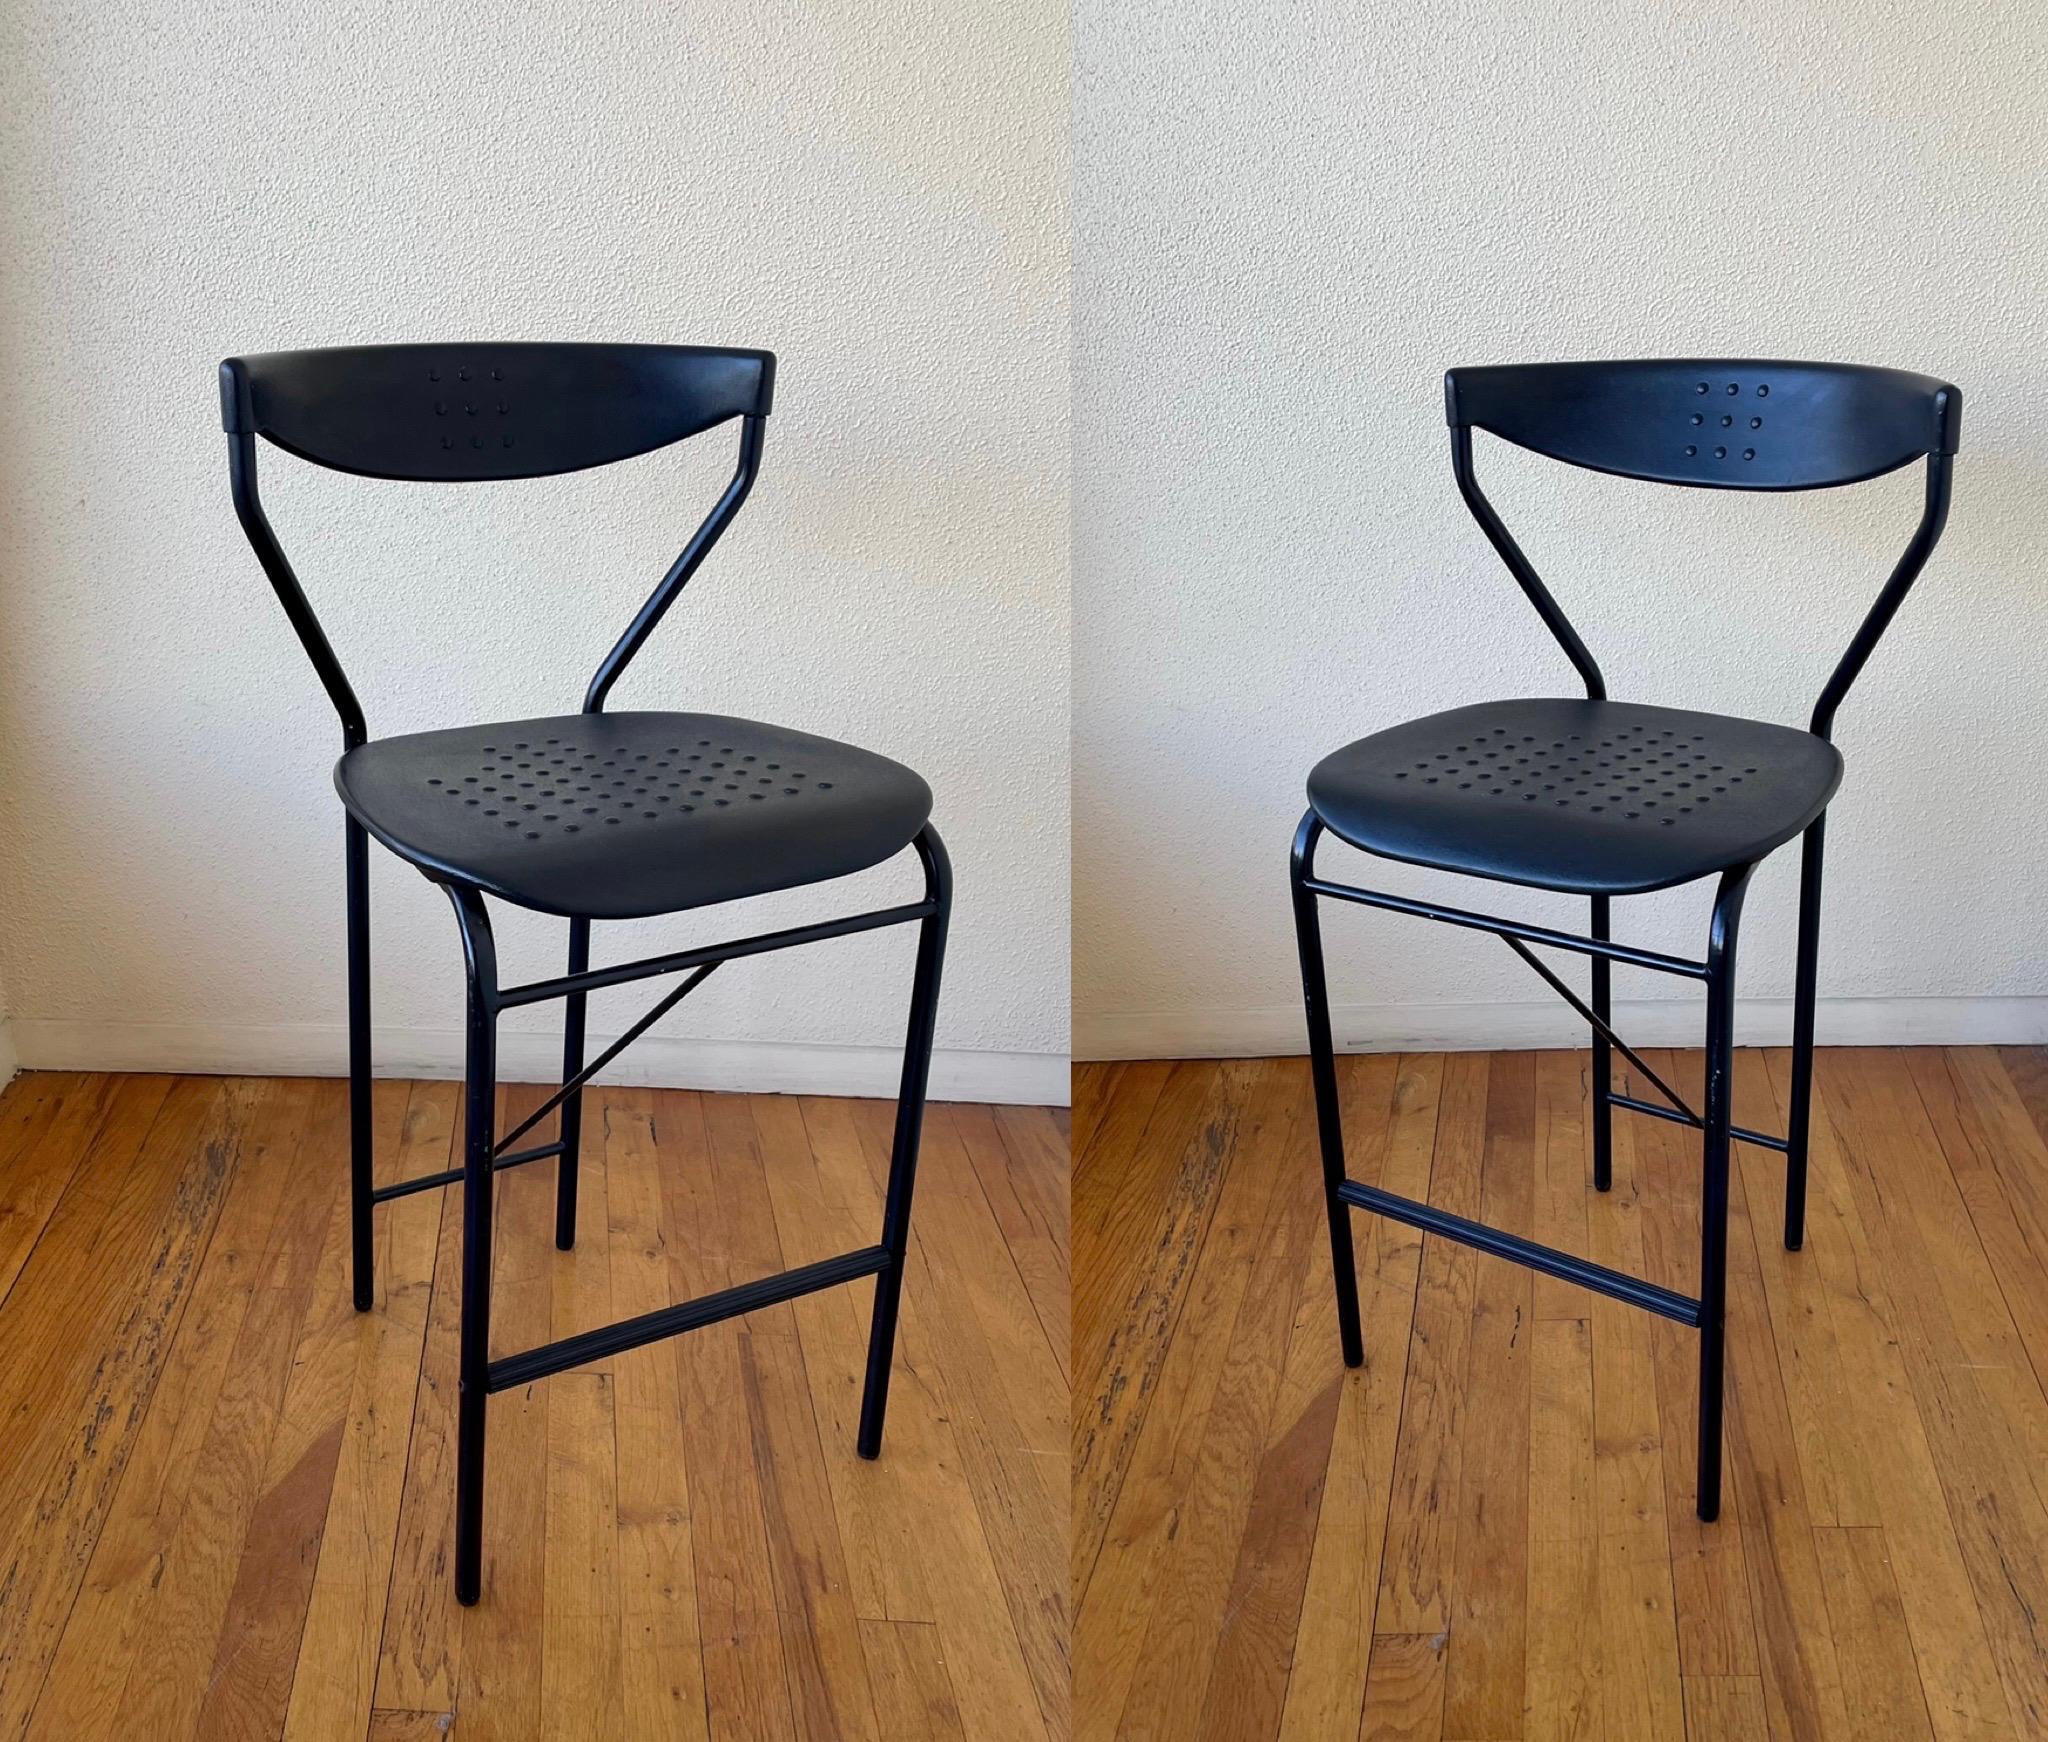 Nice pair of Italian bar stools, Made in Italy circa the 1980s, black tubular pipping with black rubber backrest, and seat, its really nice and comfy rubbery material, the stools are nice solid and sturdy, with a total Memphis look.